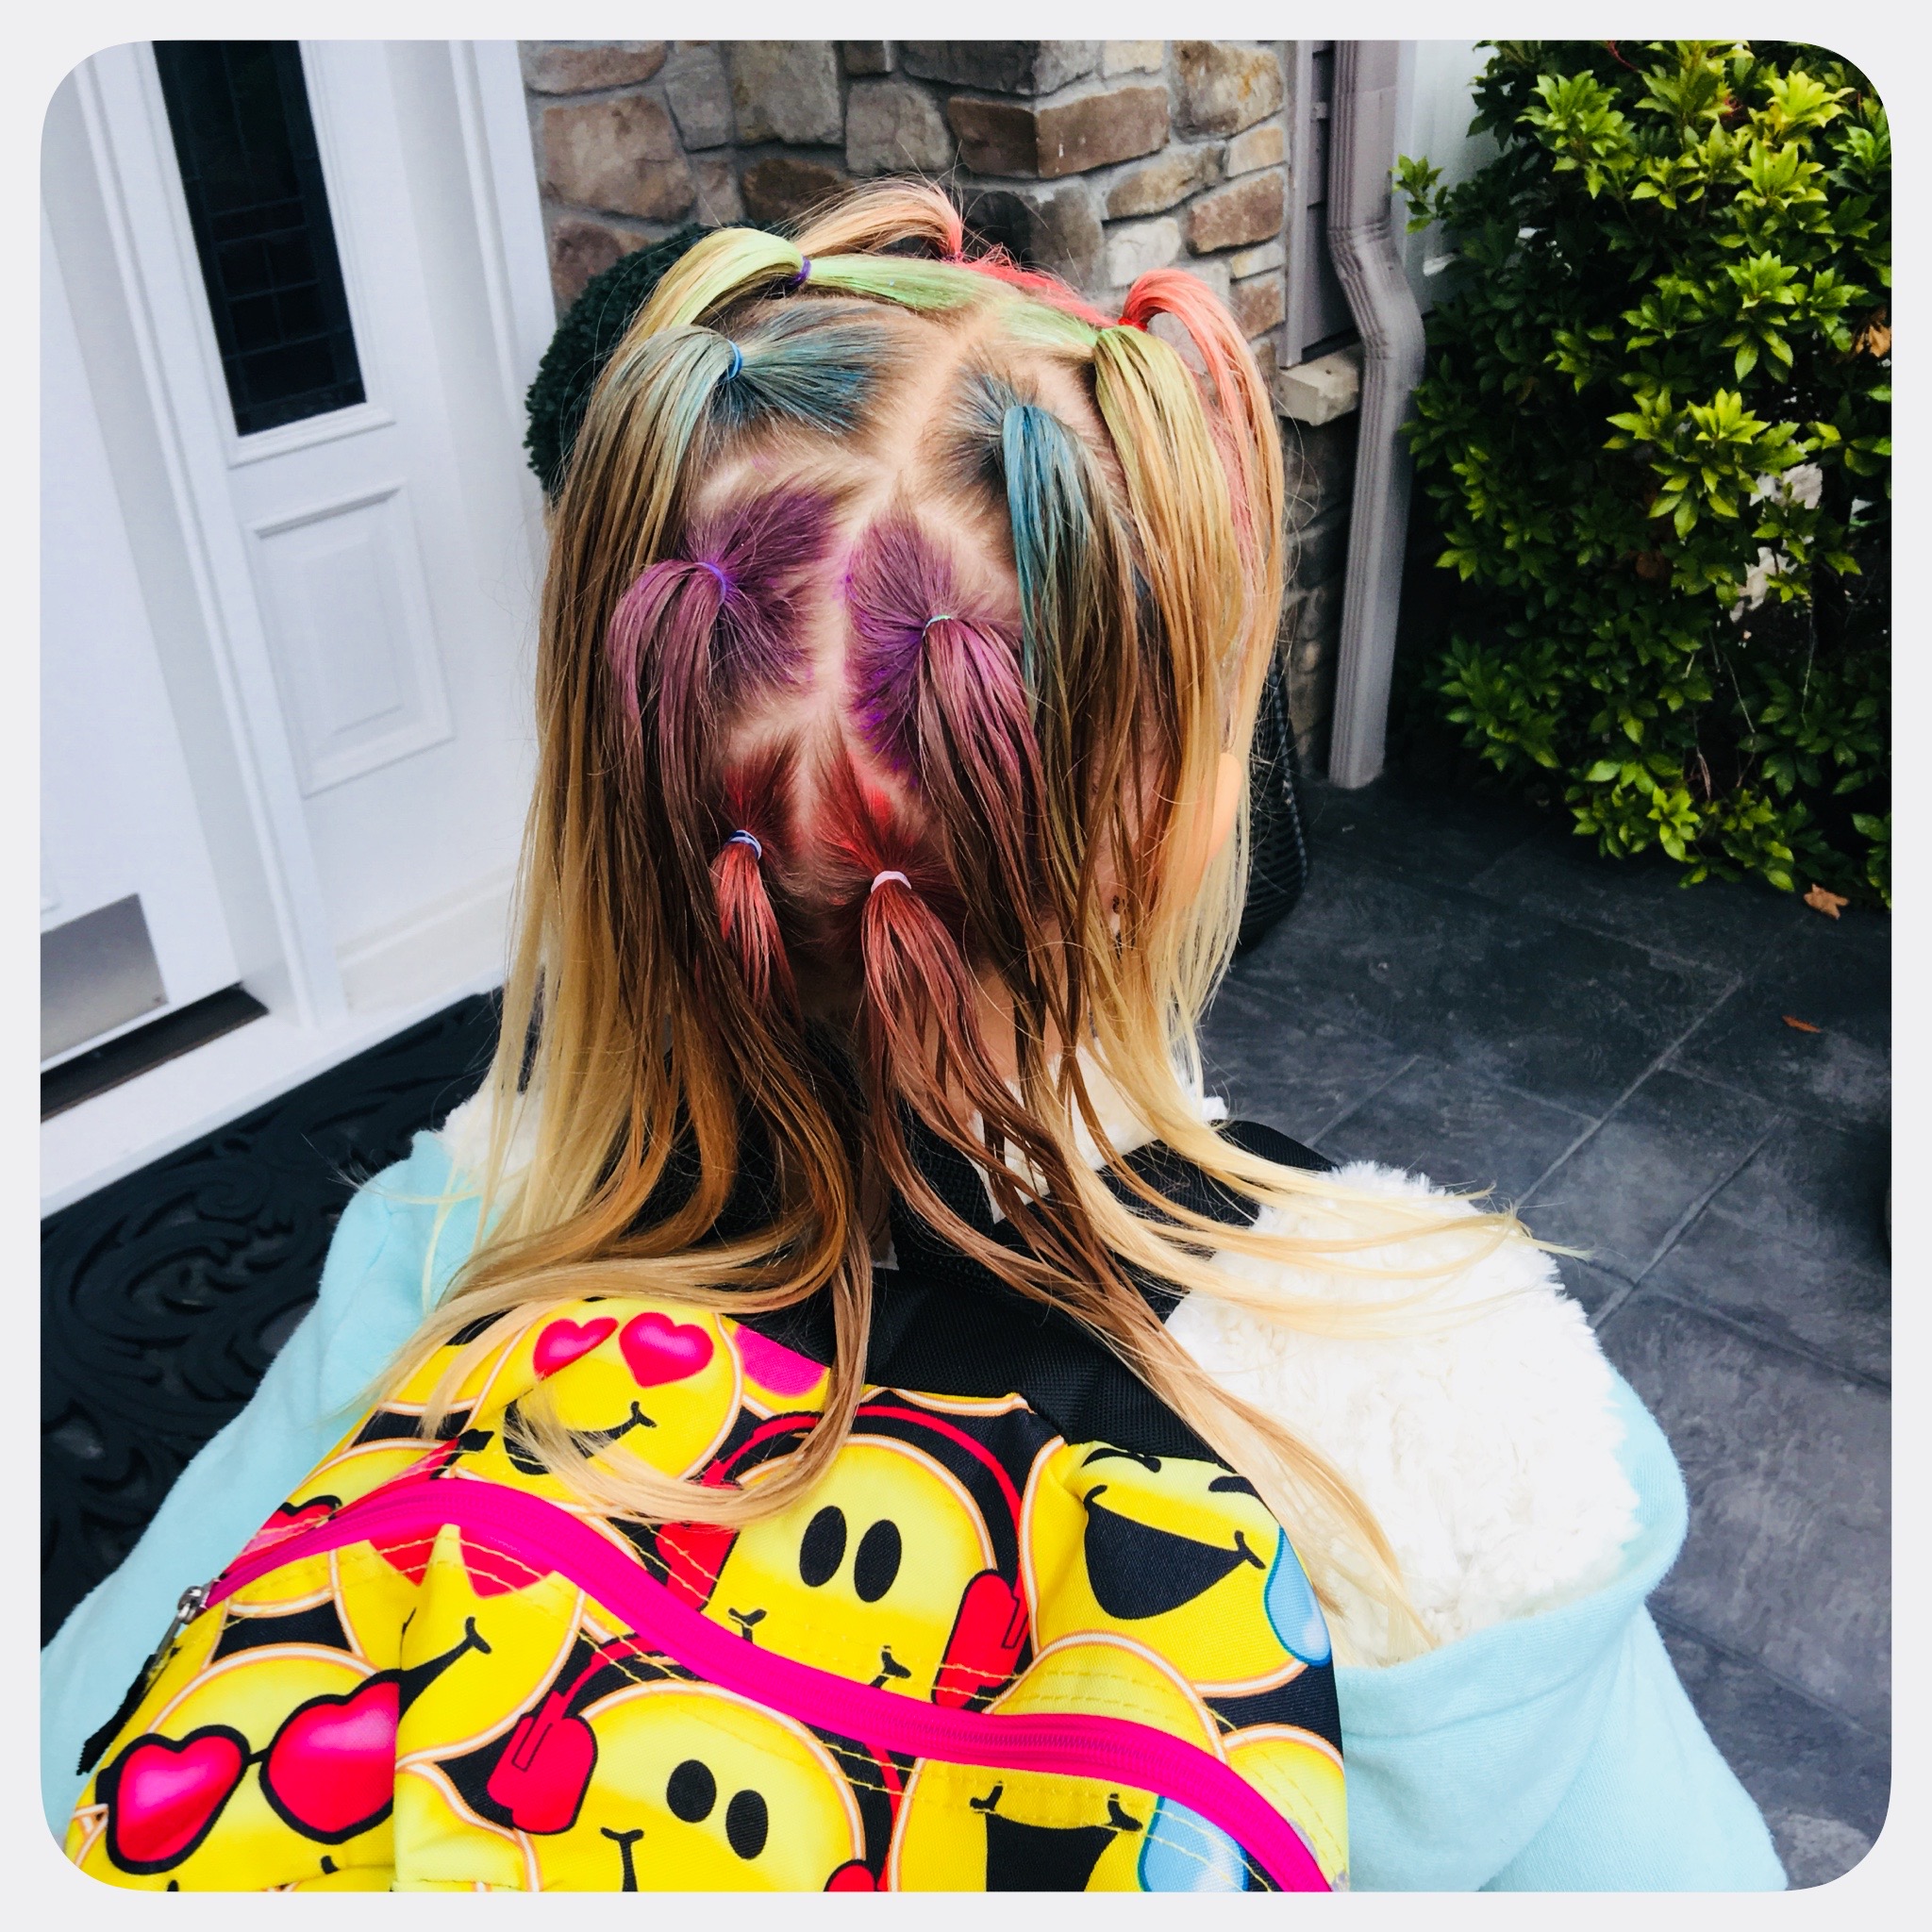 Crazy Hair Day: back to school means lots of spirit days. Here is a simple way to create crazy hair and doesn't take too long.